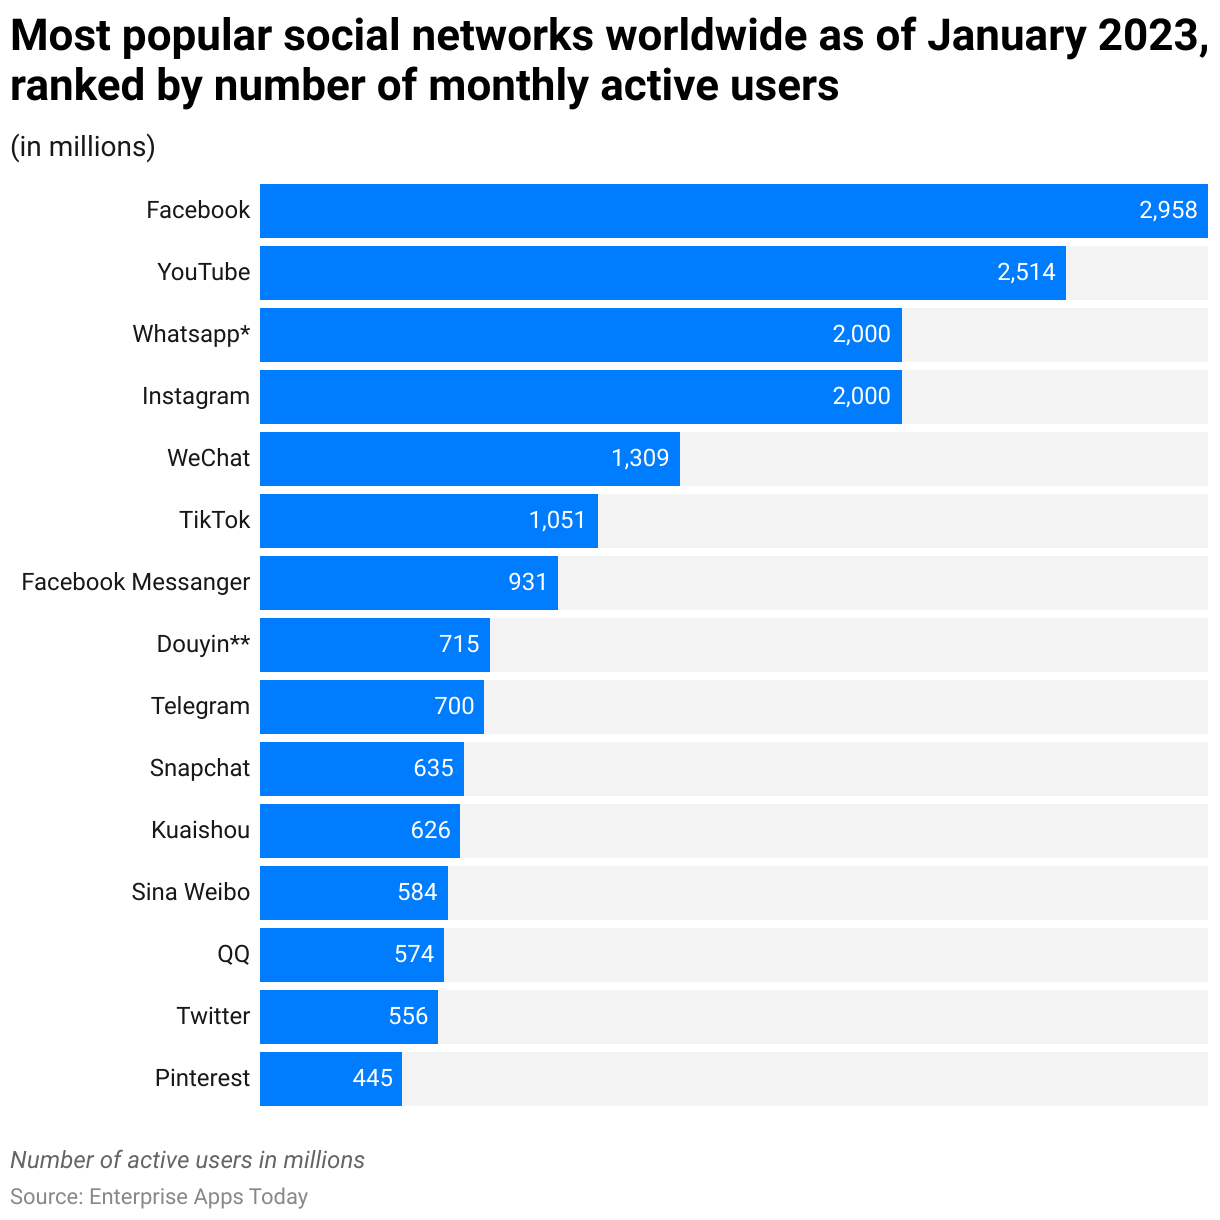 Most popular social networks worldwide as of January 2023, ranked by number of monthly active users
